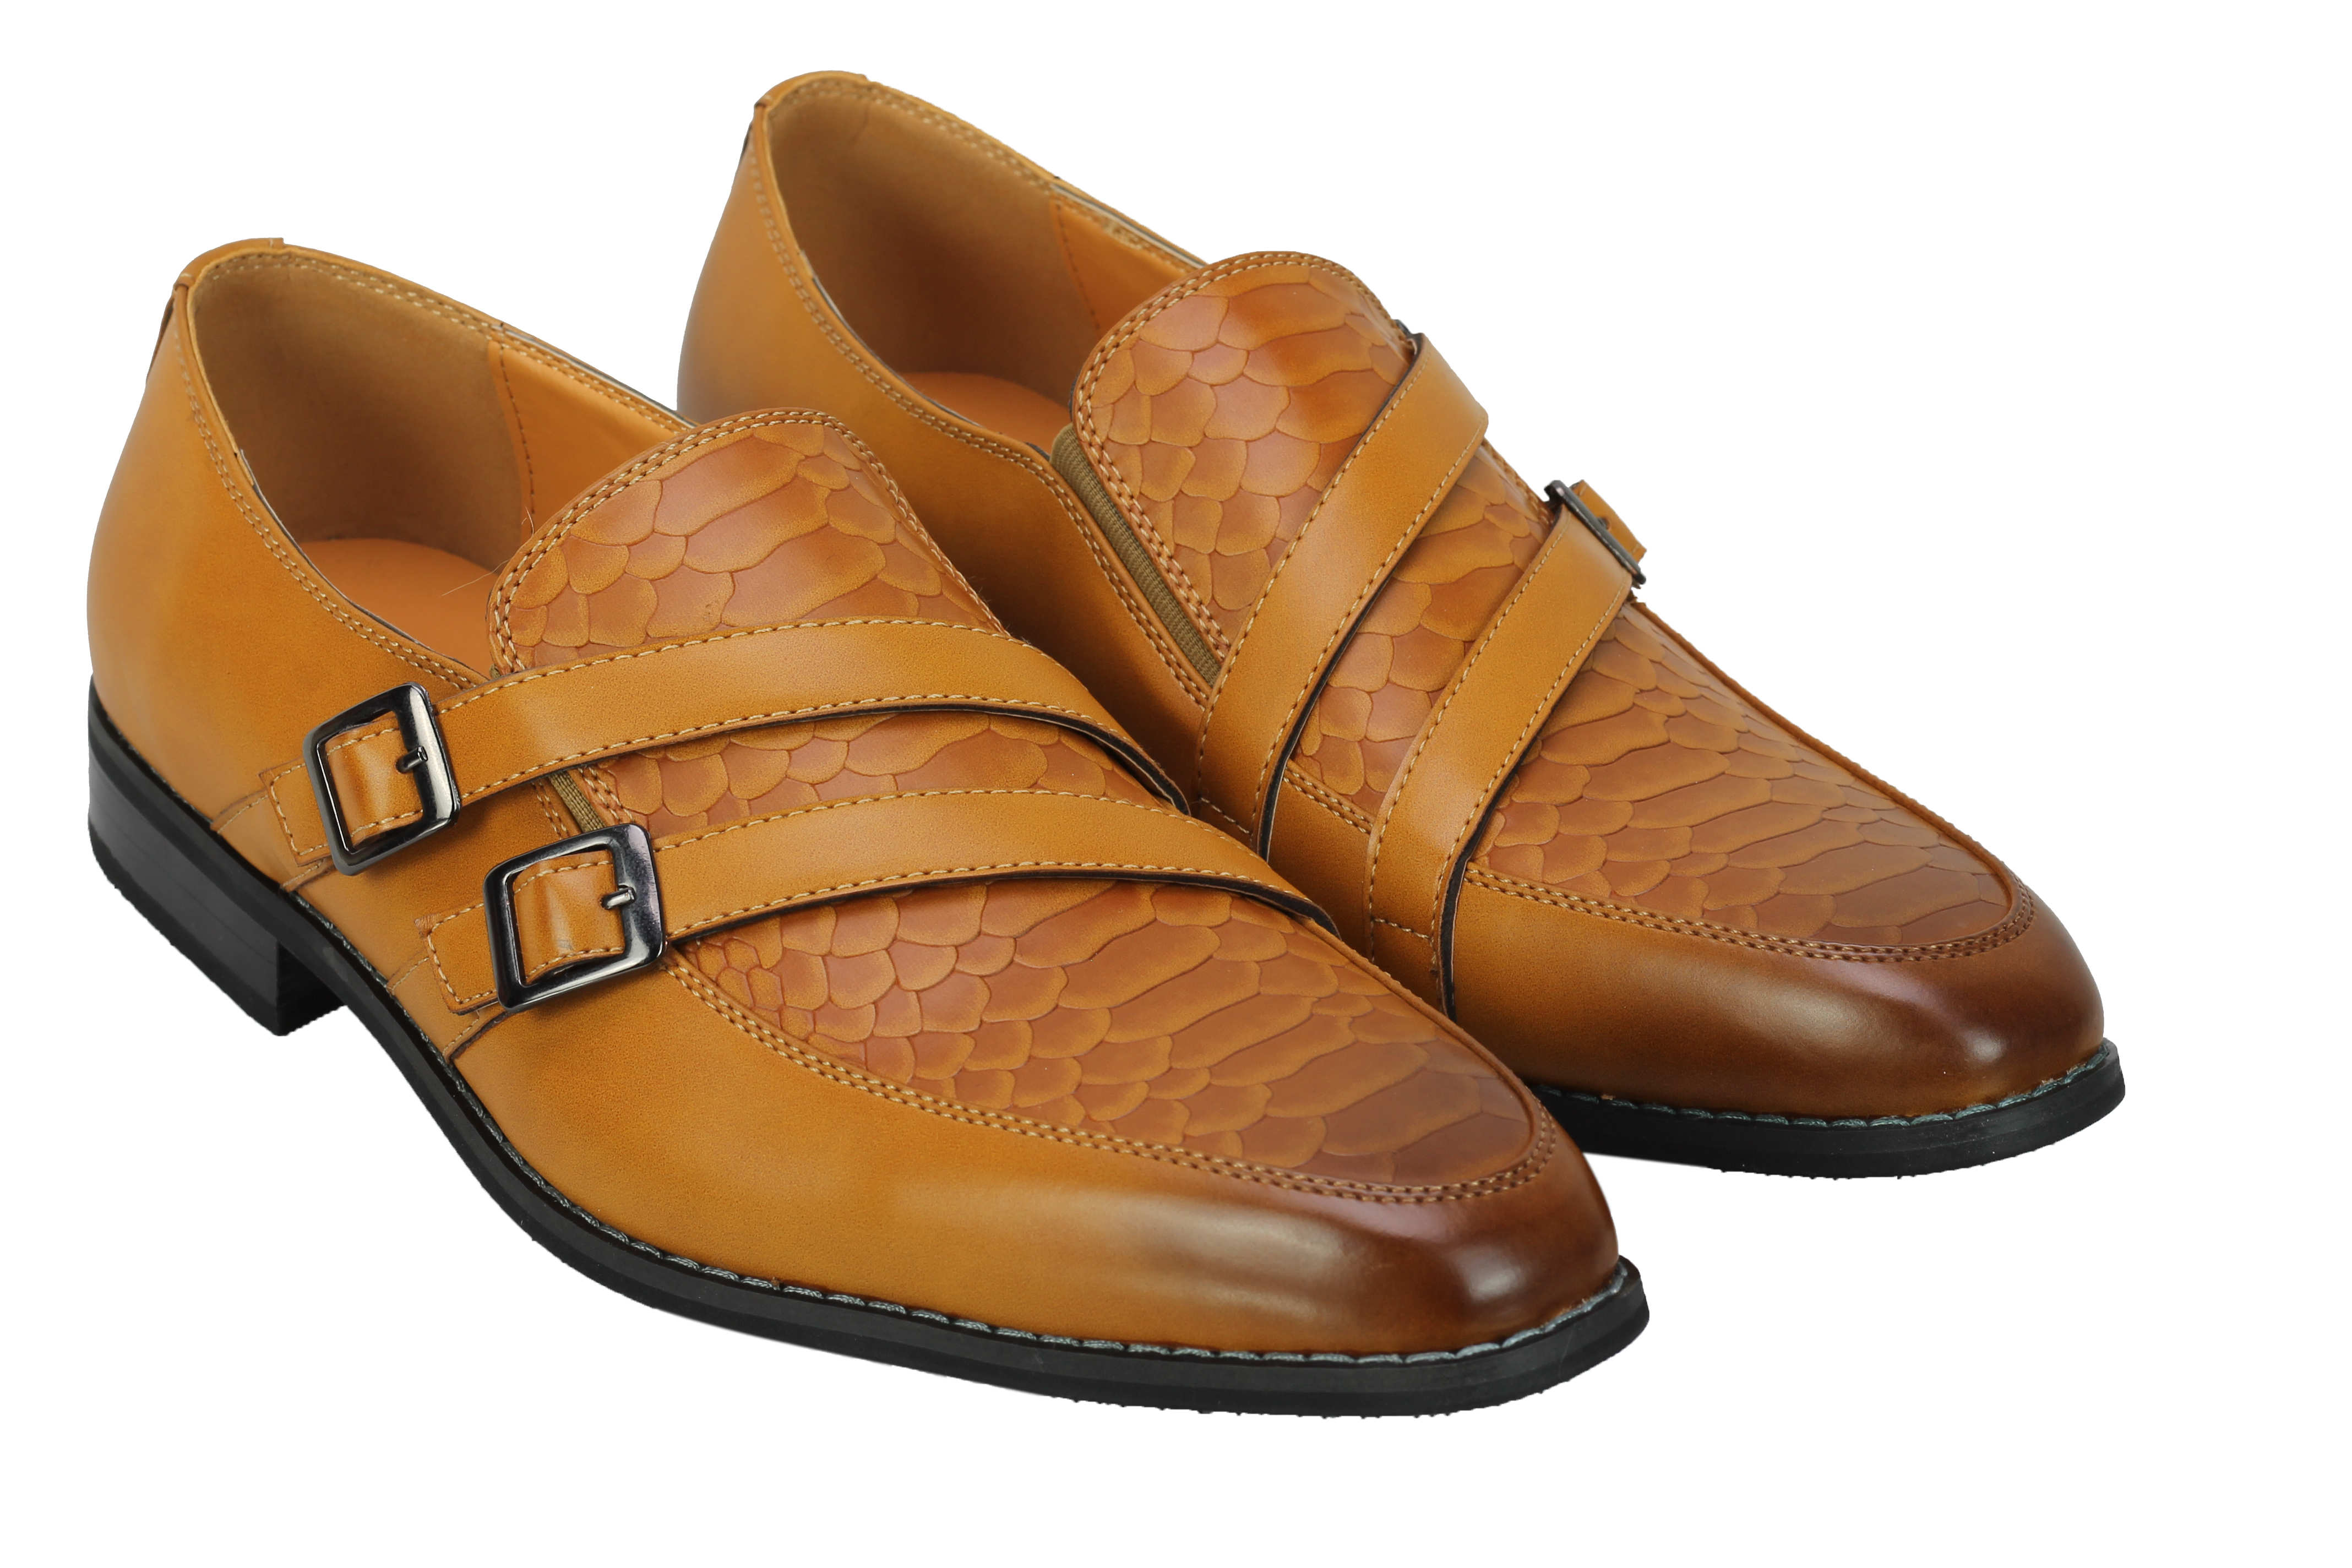 Mens Leather Lined Monk Strap Slip on Shoes Smart Italian Style Retro Loafers | eBay